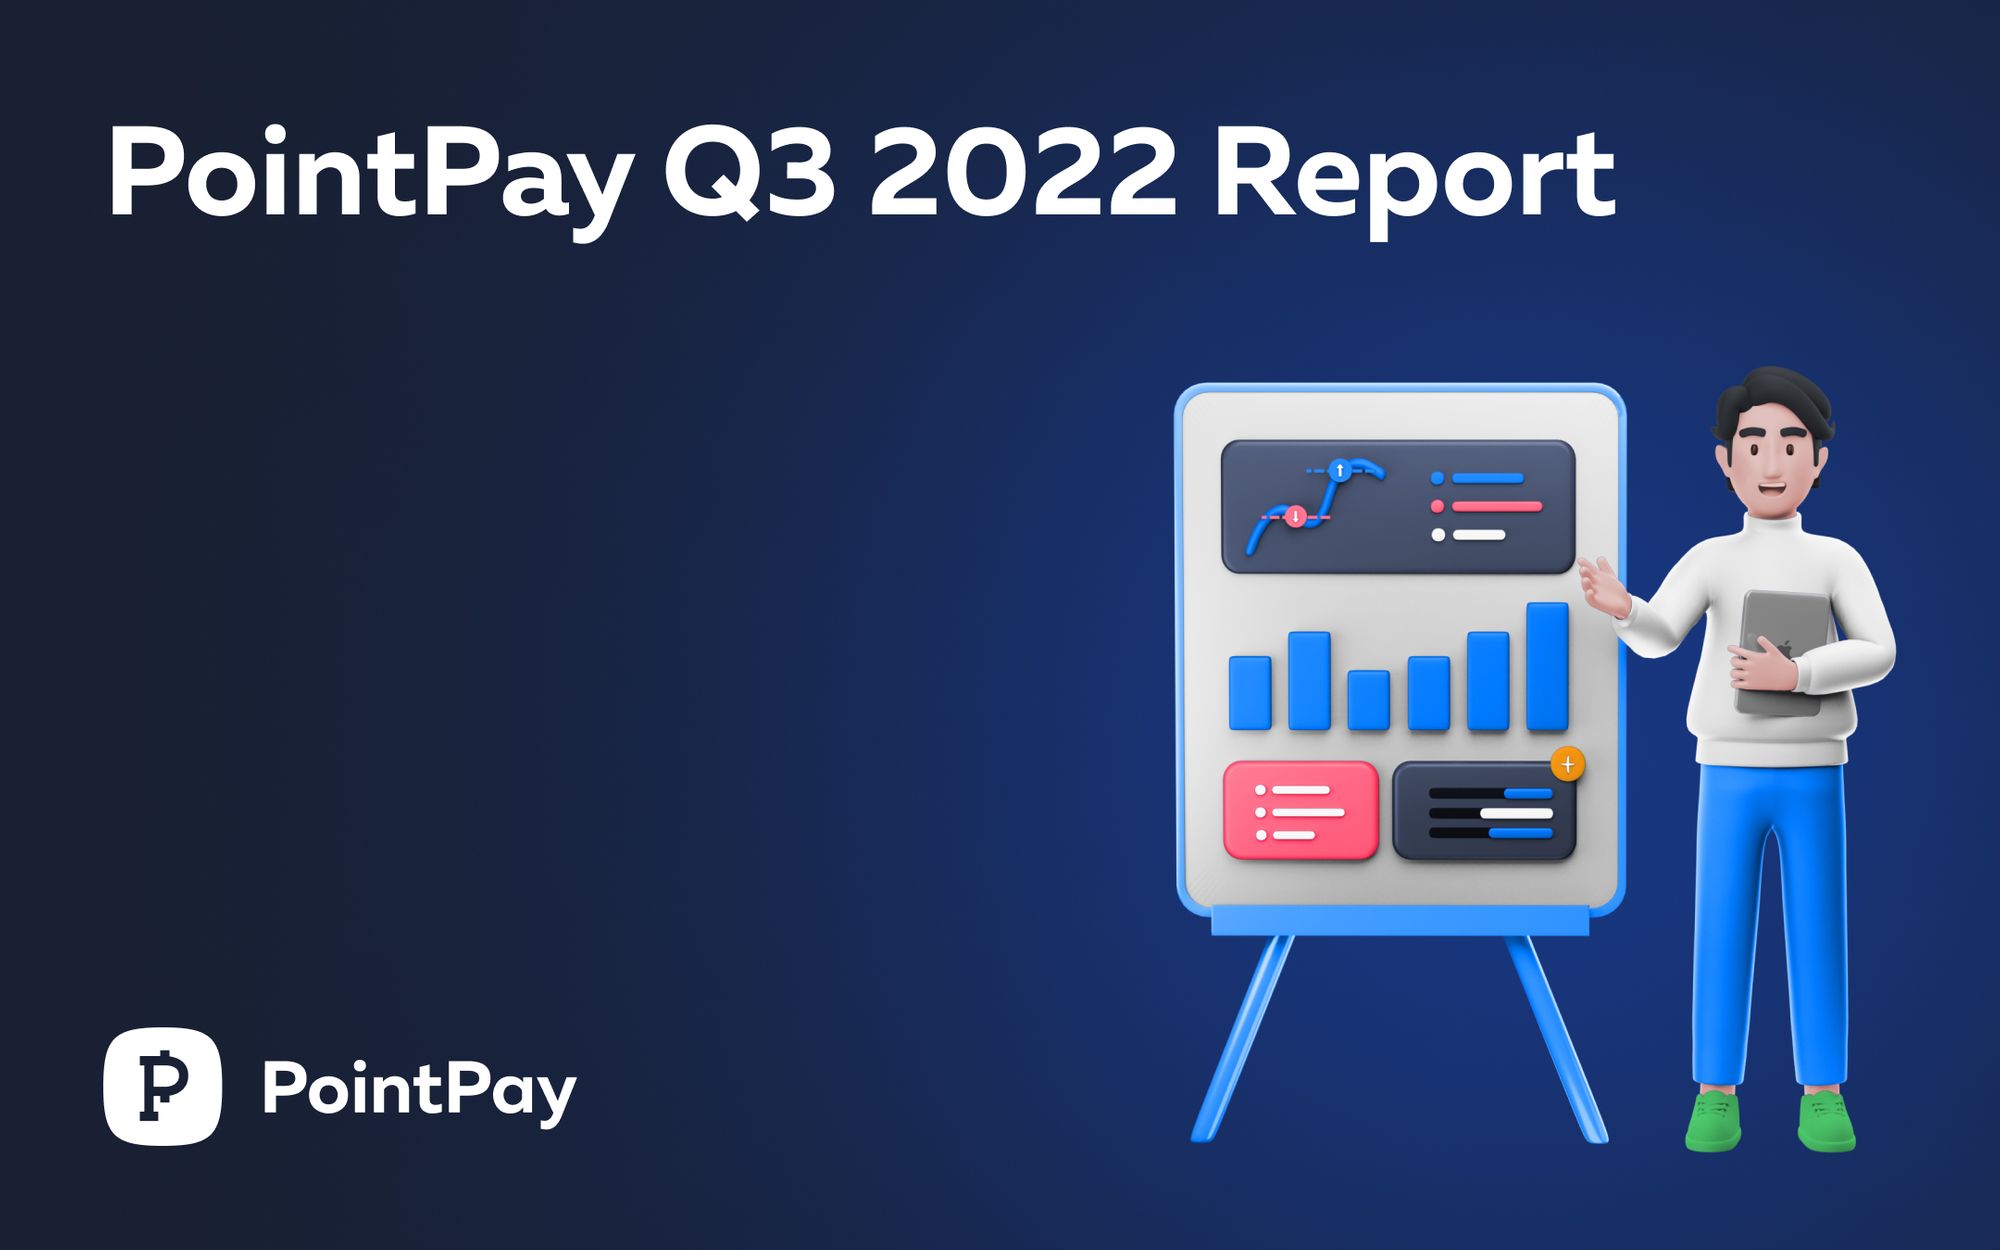 PointPay Q3 2022 Report Released